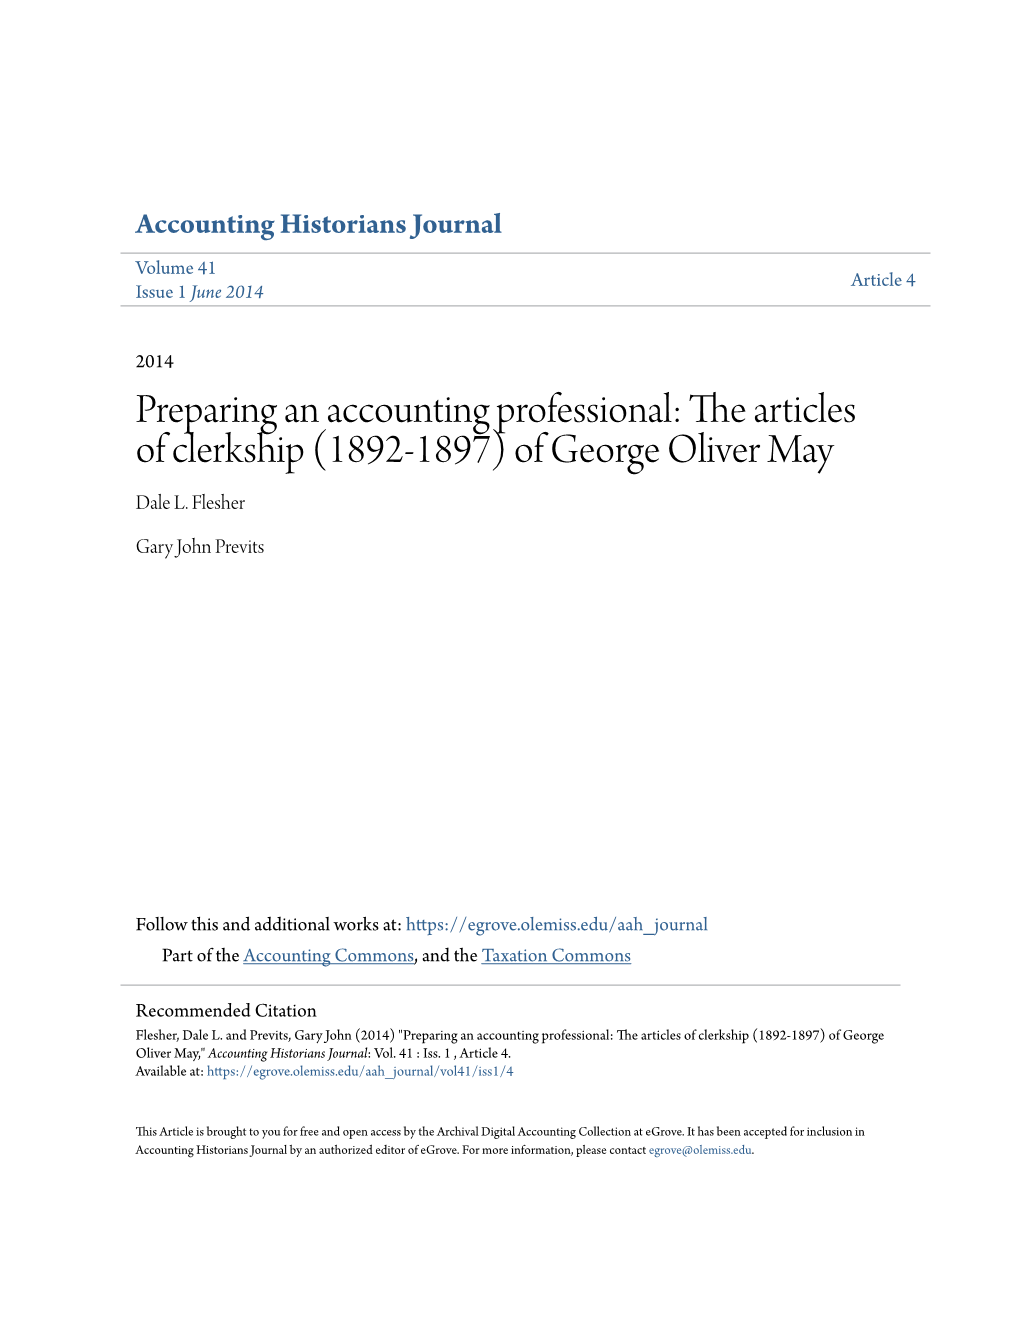 Preparing an Accounting Professional: the Ra Ticles of Clerkship (1892-1897) of George Oliver May Dale L